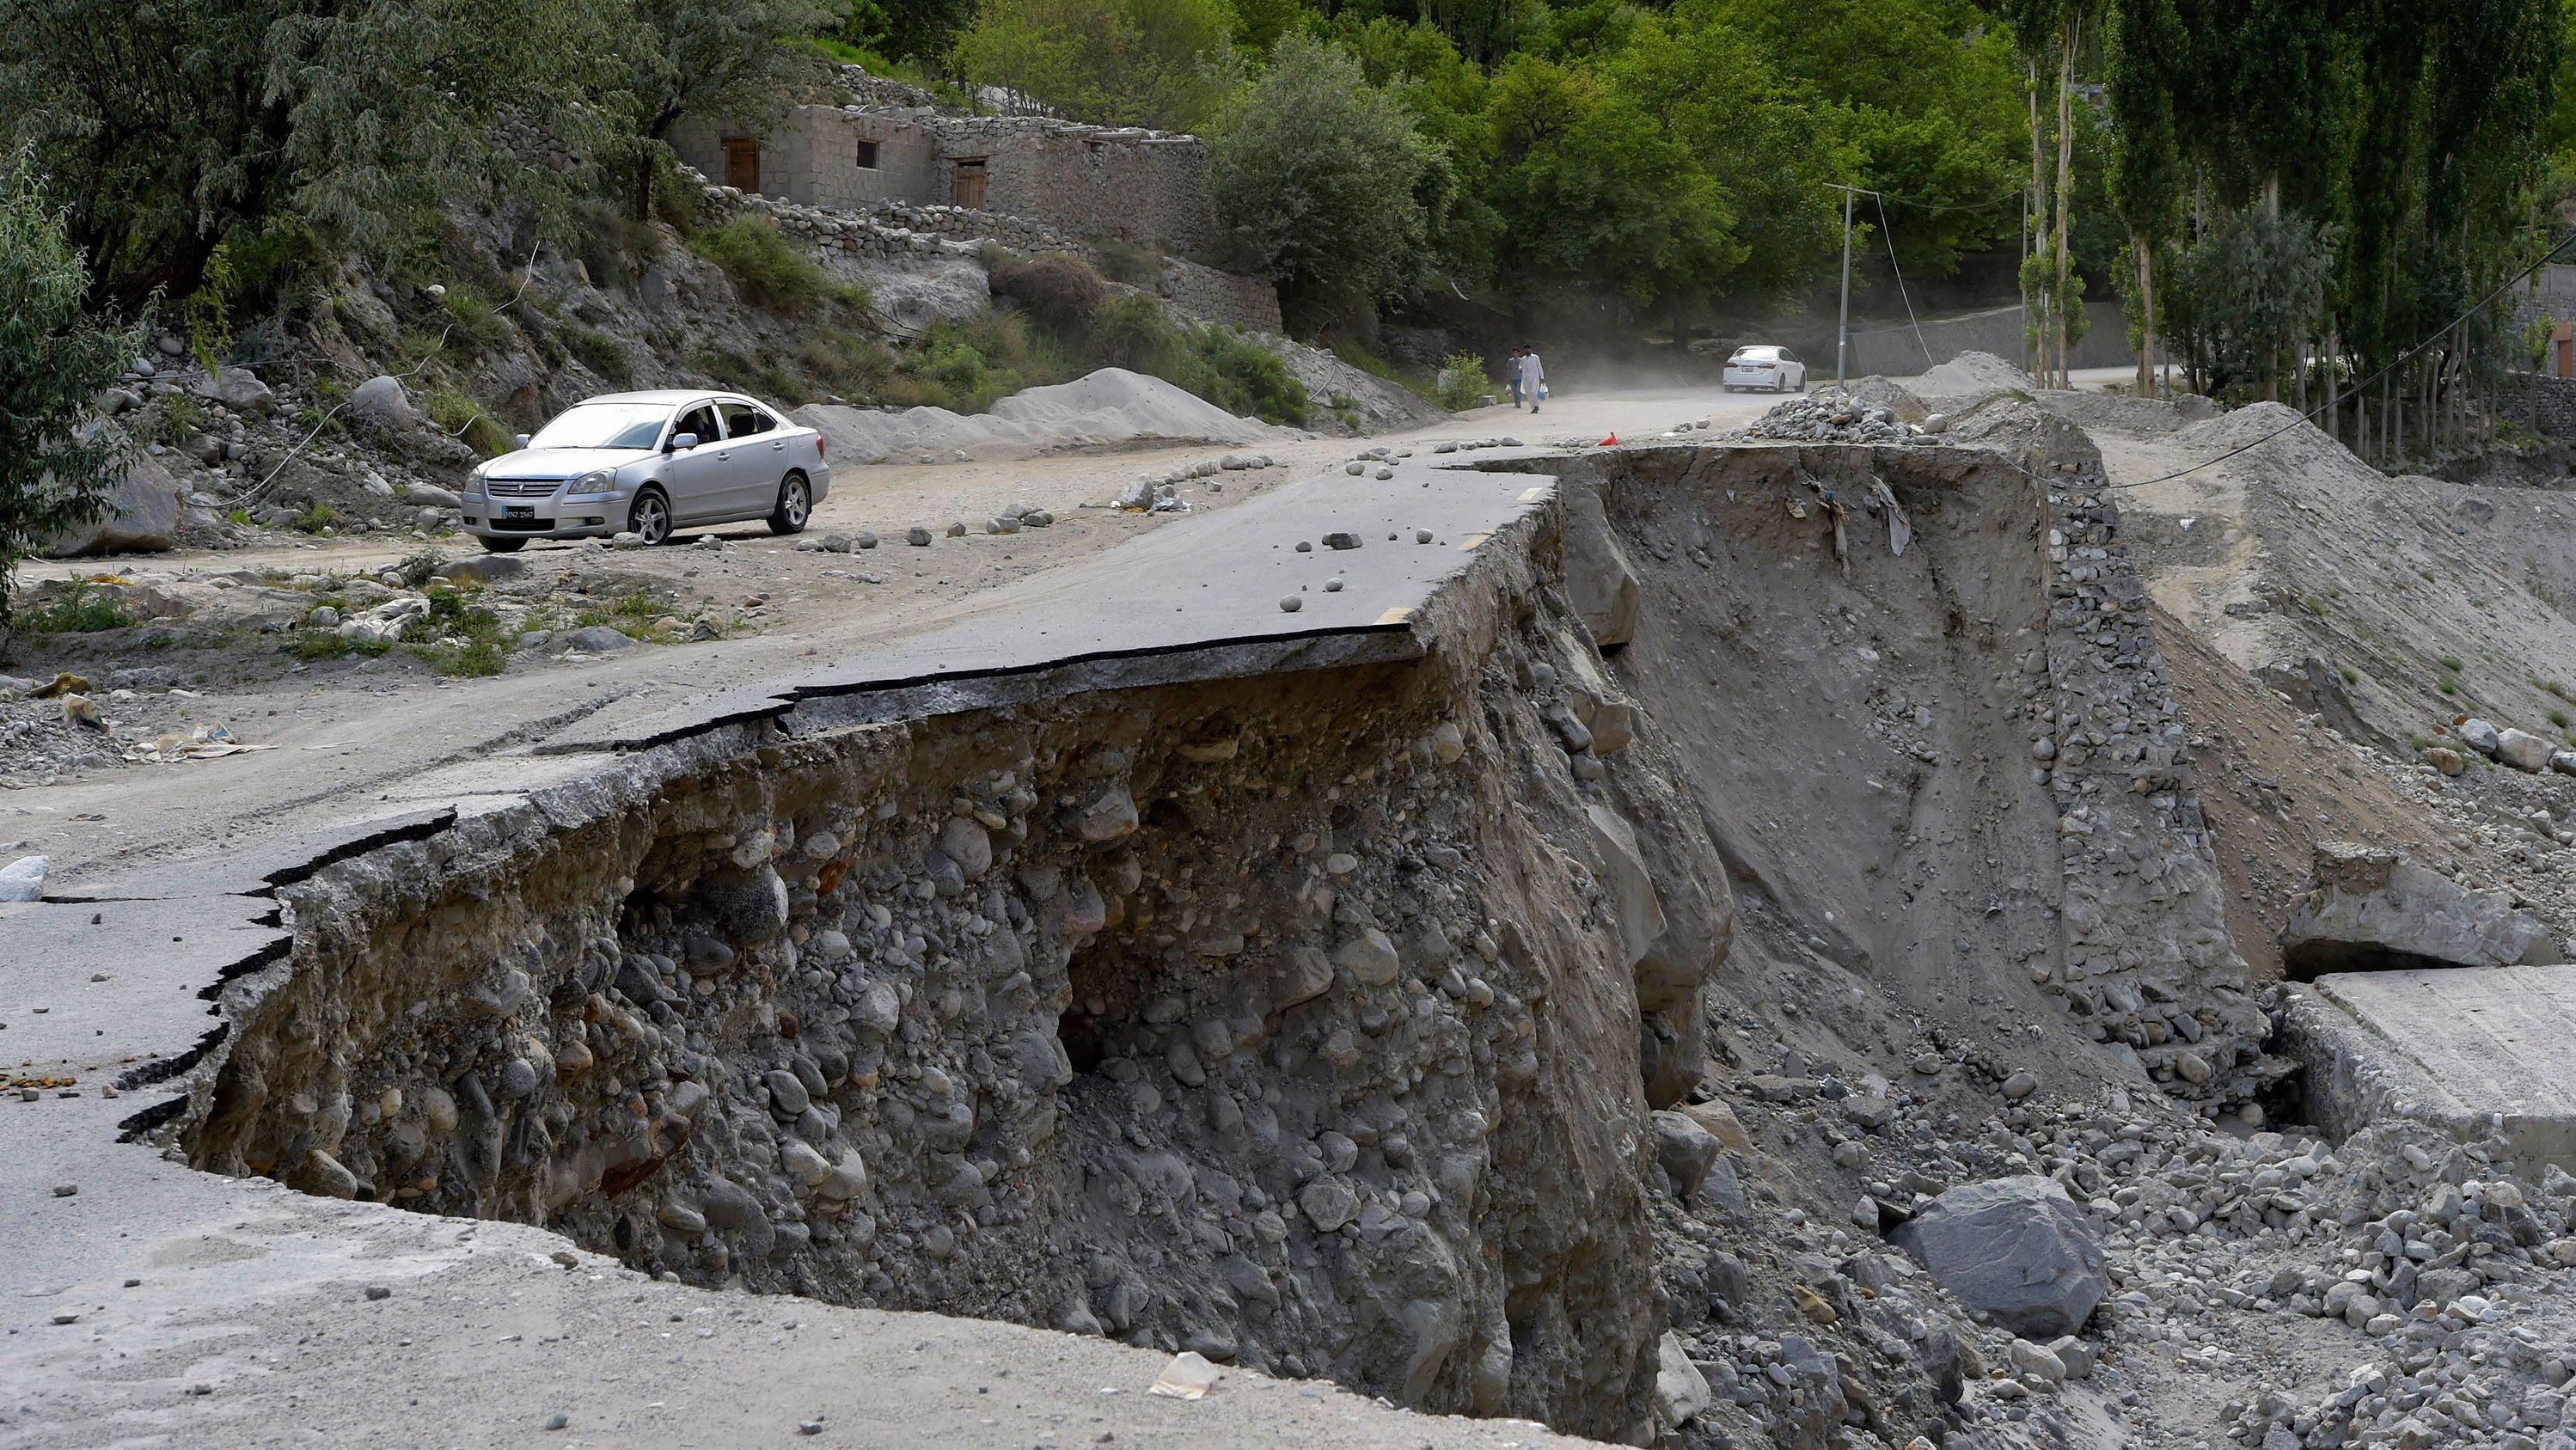 A vehicle drives past a partially collapsed section of Pakistan's Karakoram Highway damaged after a glacial lake outburst in the country's Gilgit-Baltistan region.